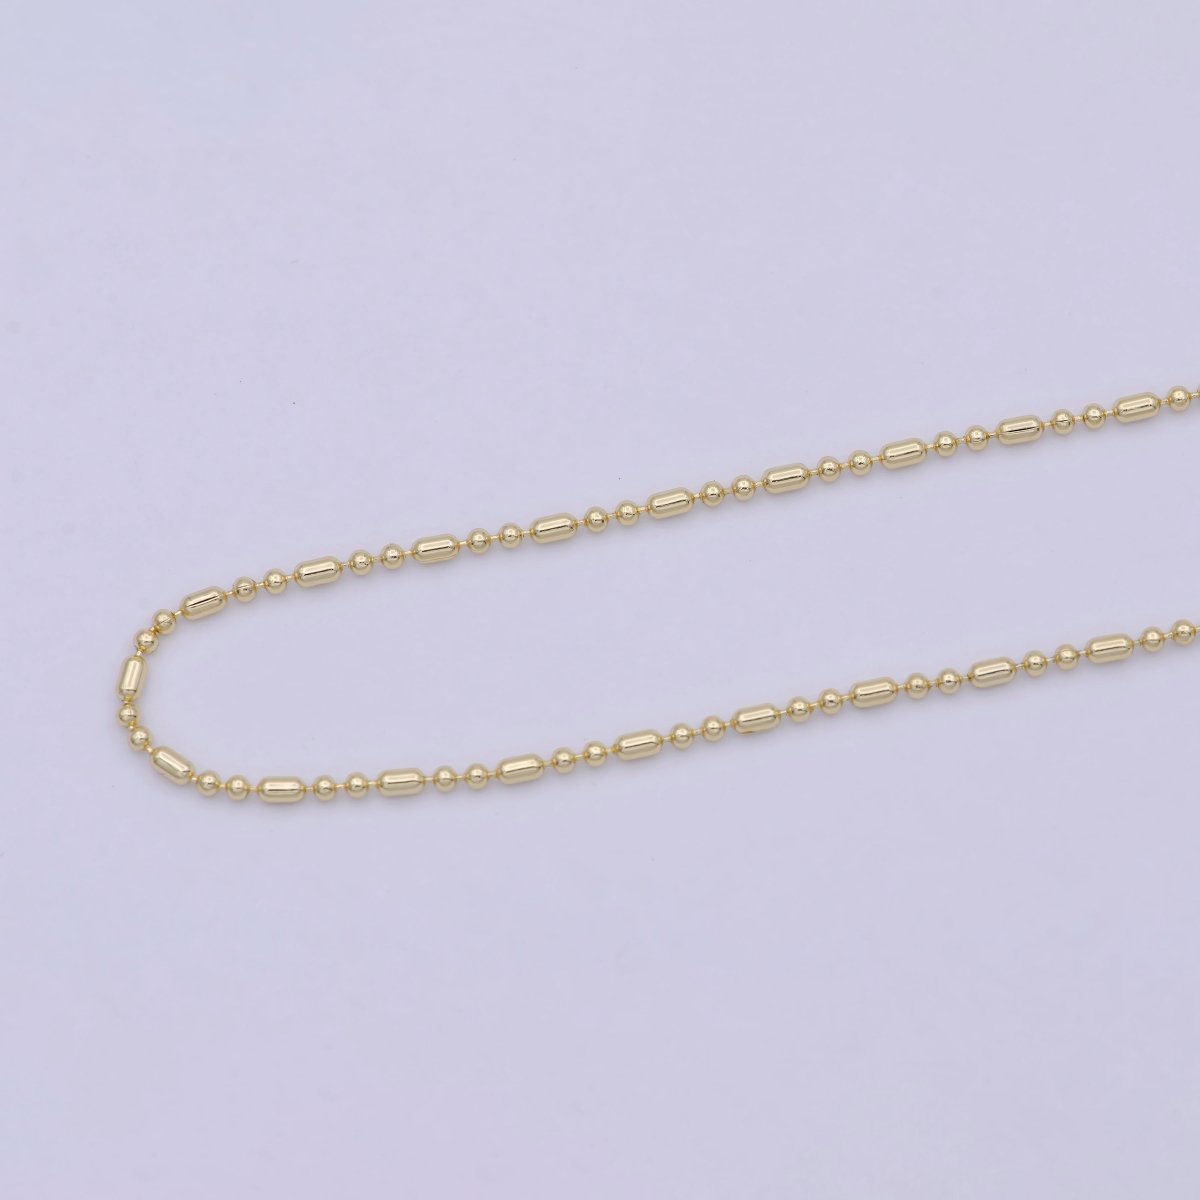 Dainty 14K Gold Filled Beaded Chain Necklace Ball chain necklace 18 inch Ready to Wear | WA-757 Clearance Pricing - DLUXCA